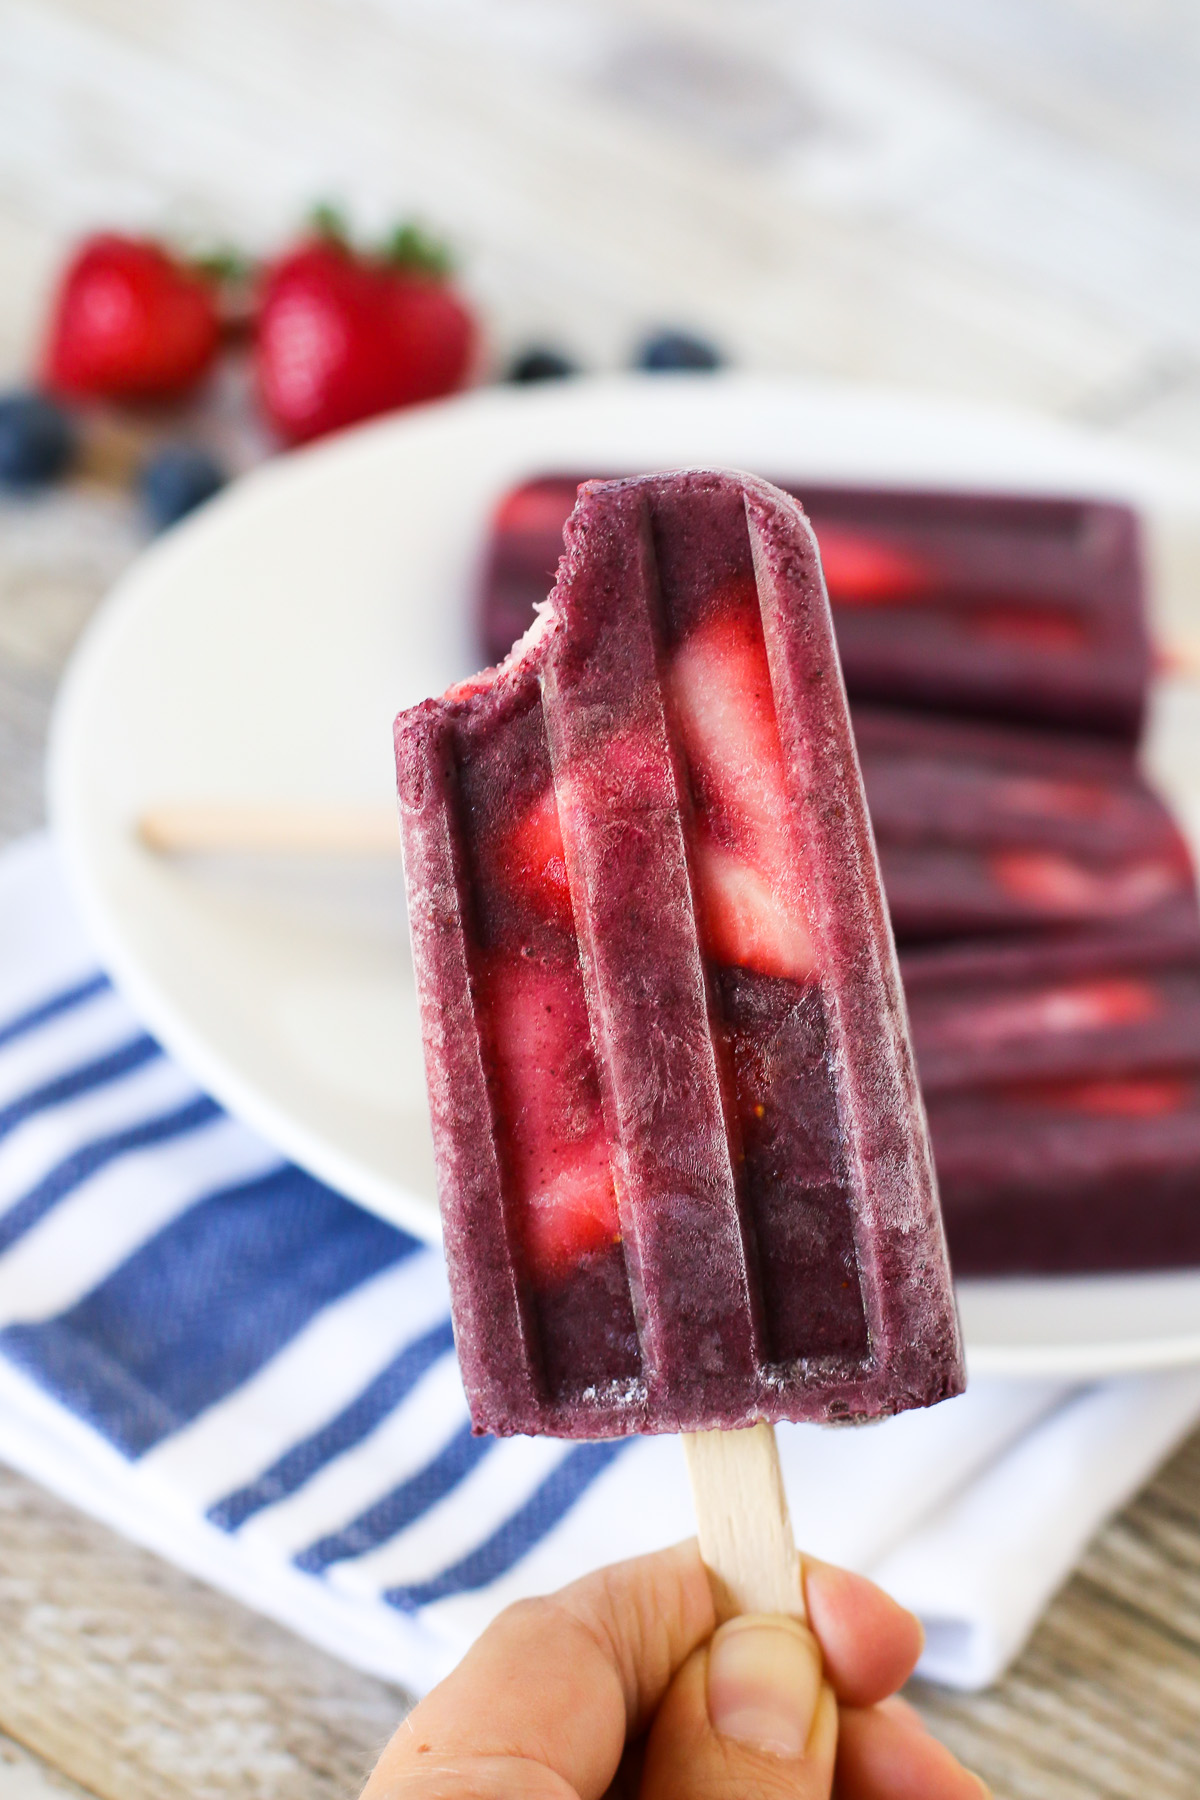 Berry Smoothie Popsicles. These perfect for summer smoothie popsicles are made with blueberries, bananas, flaxmilk and slices of fresh strawberries.